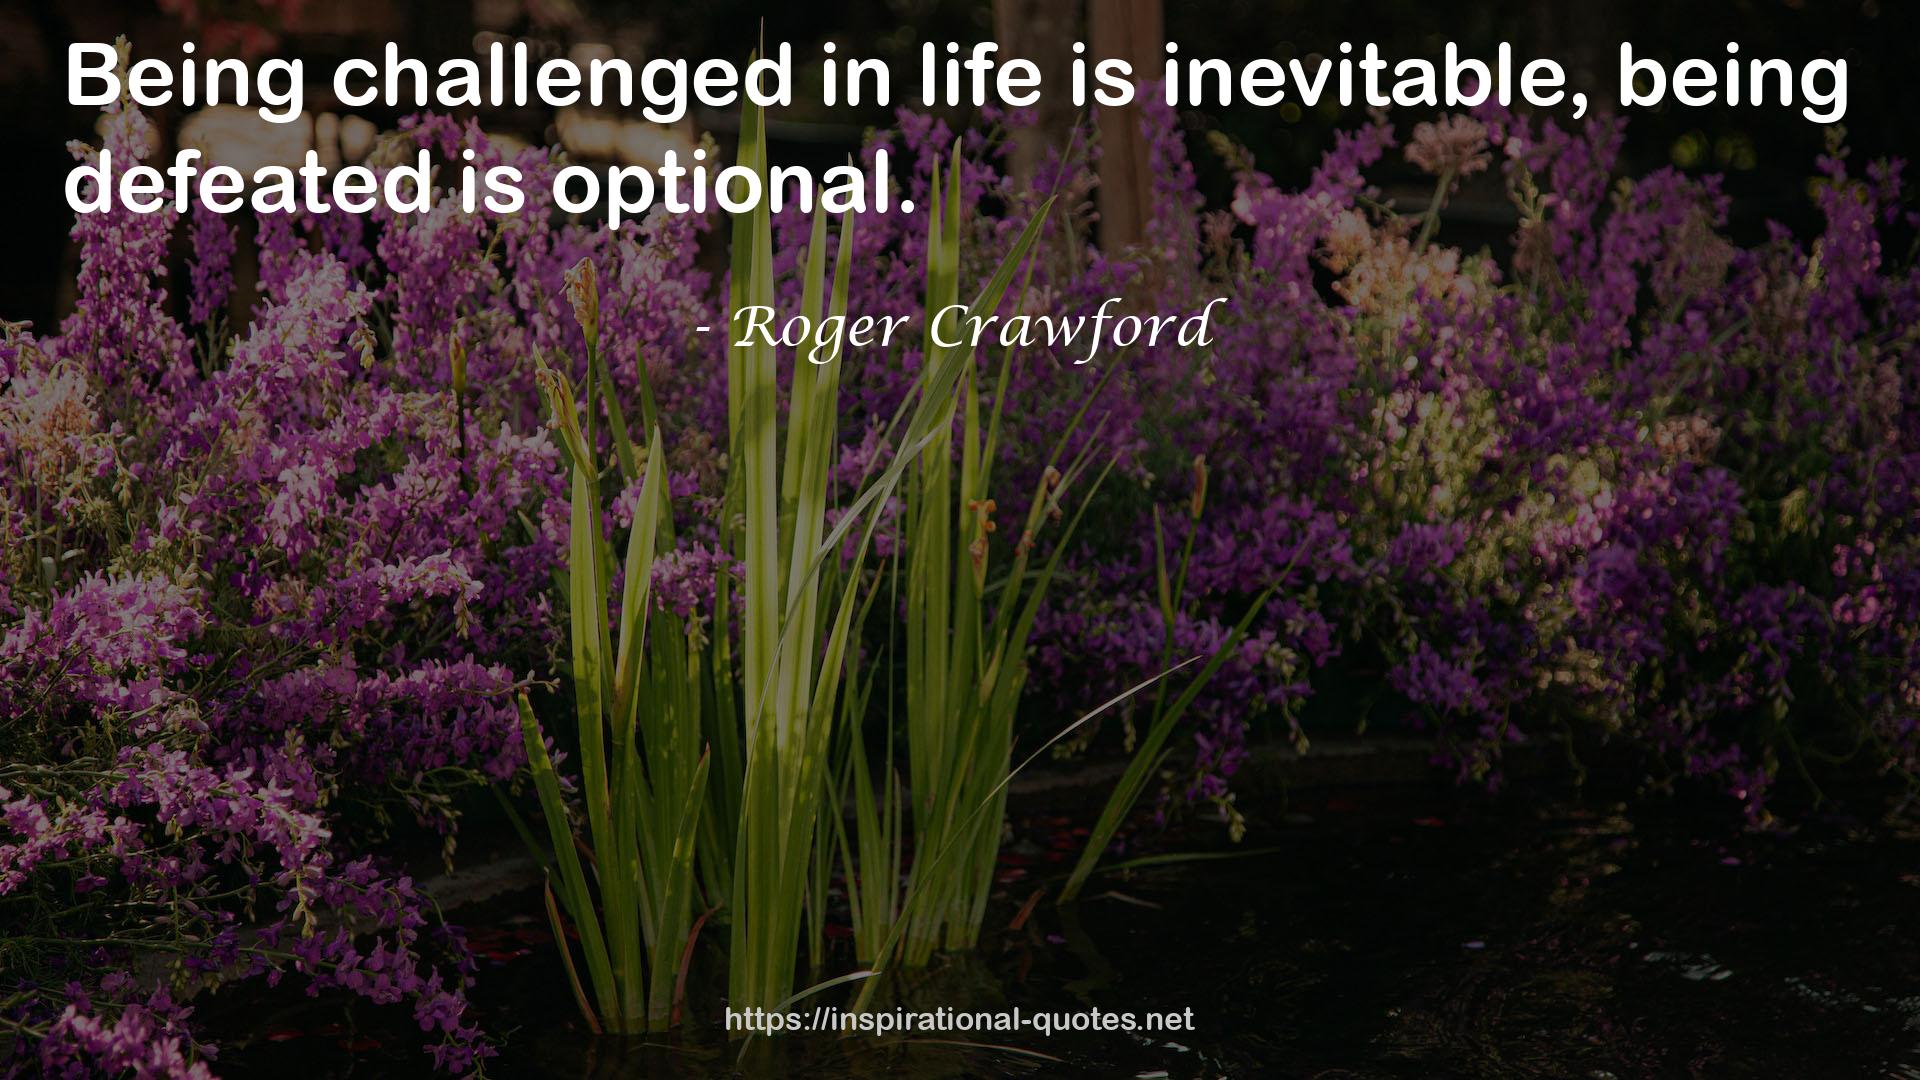 Roger Crawford QUOTES